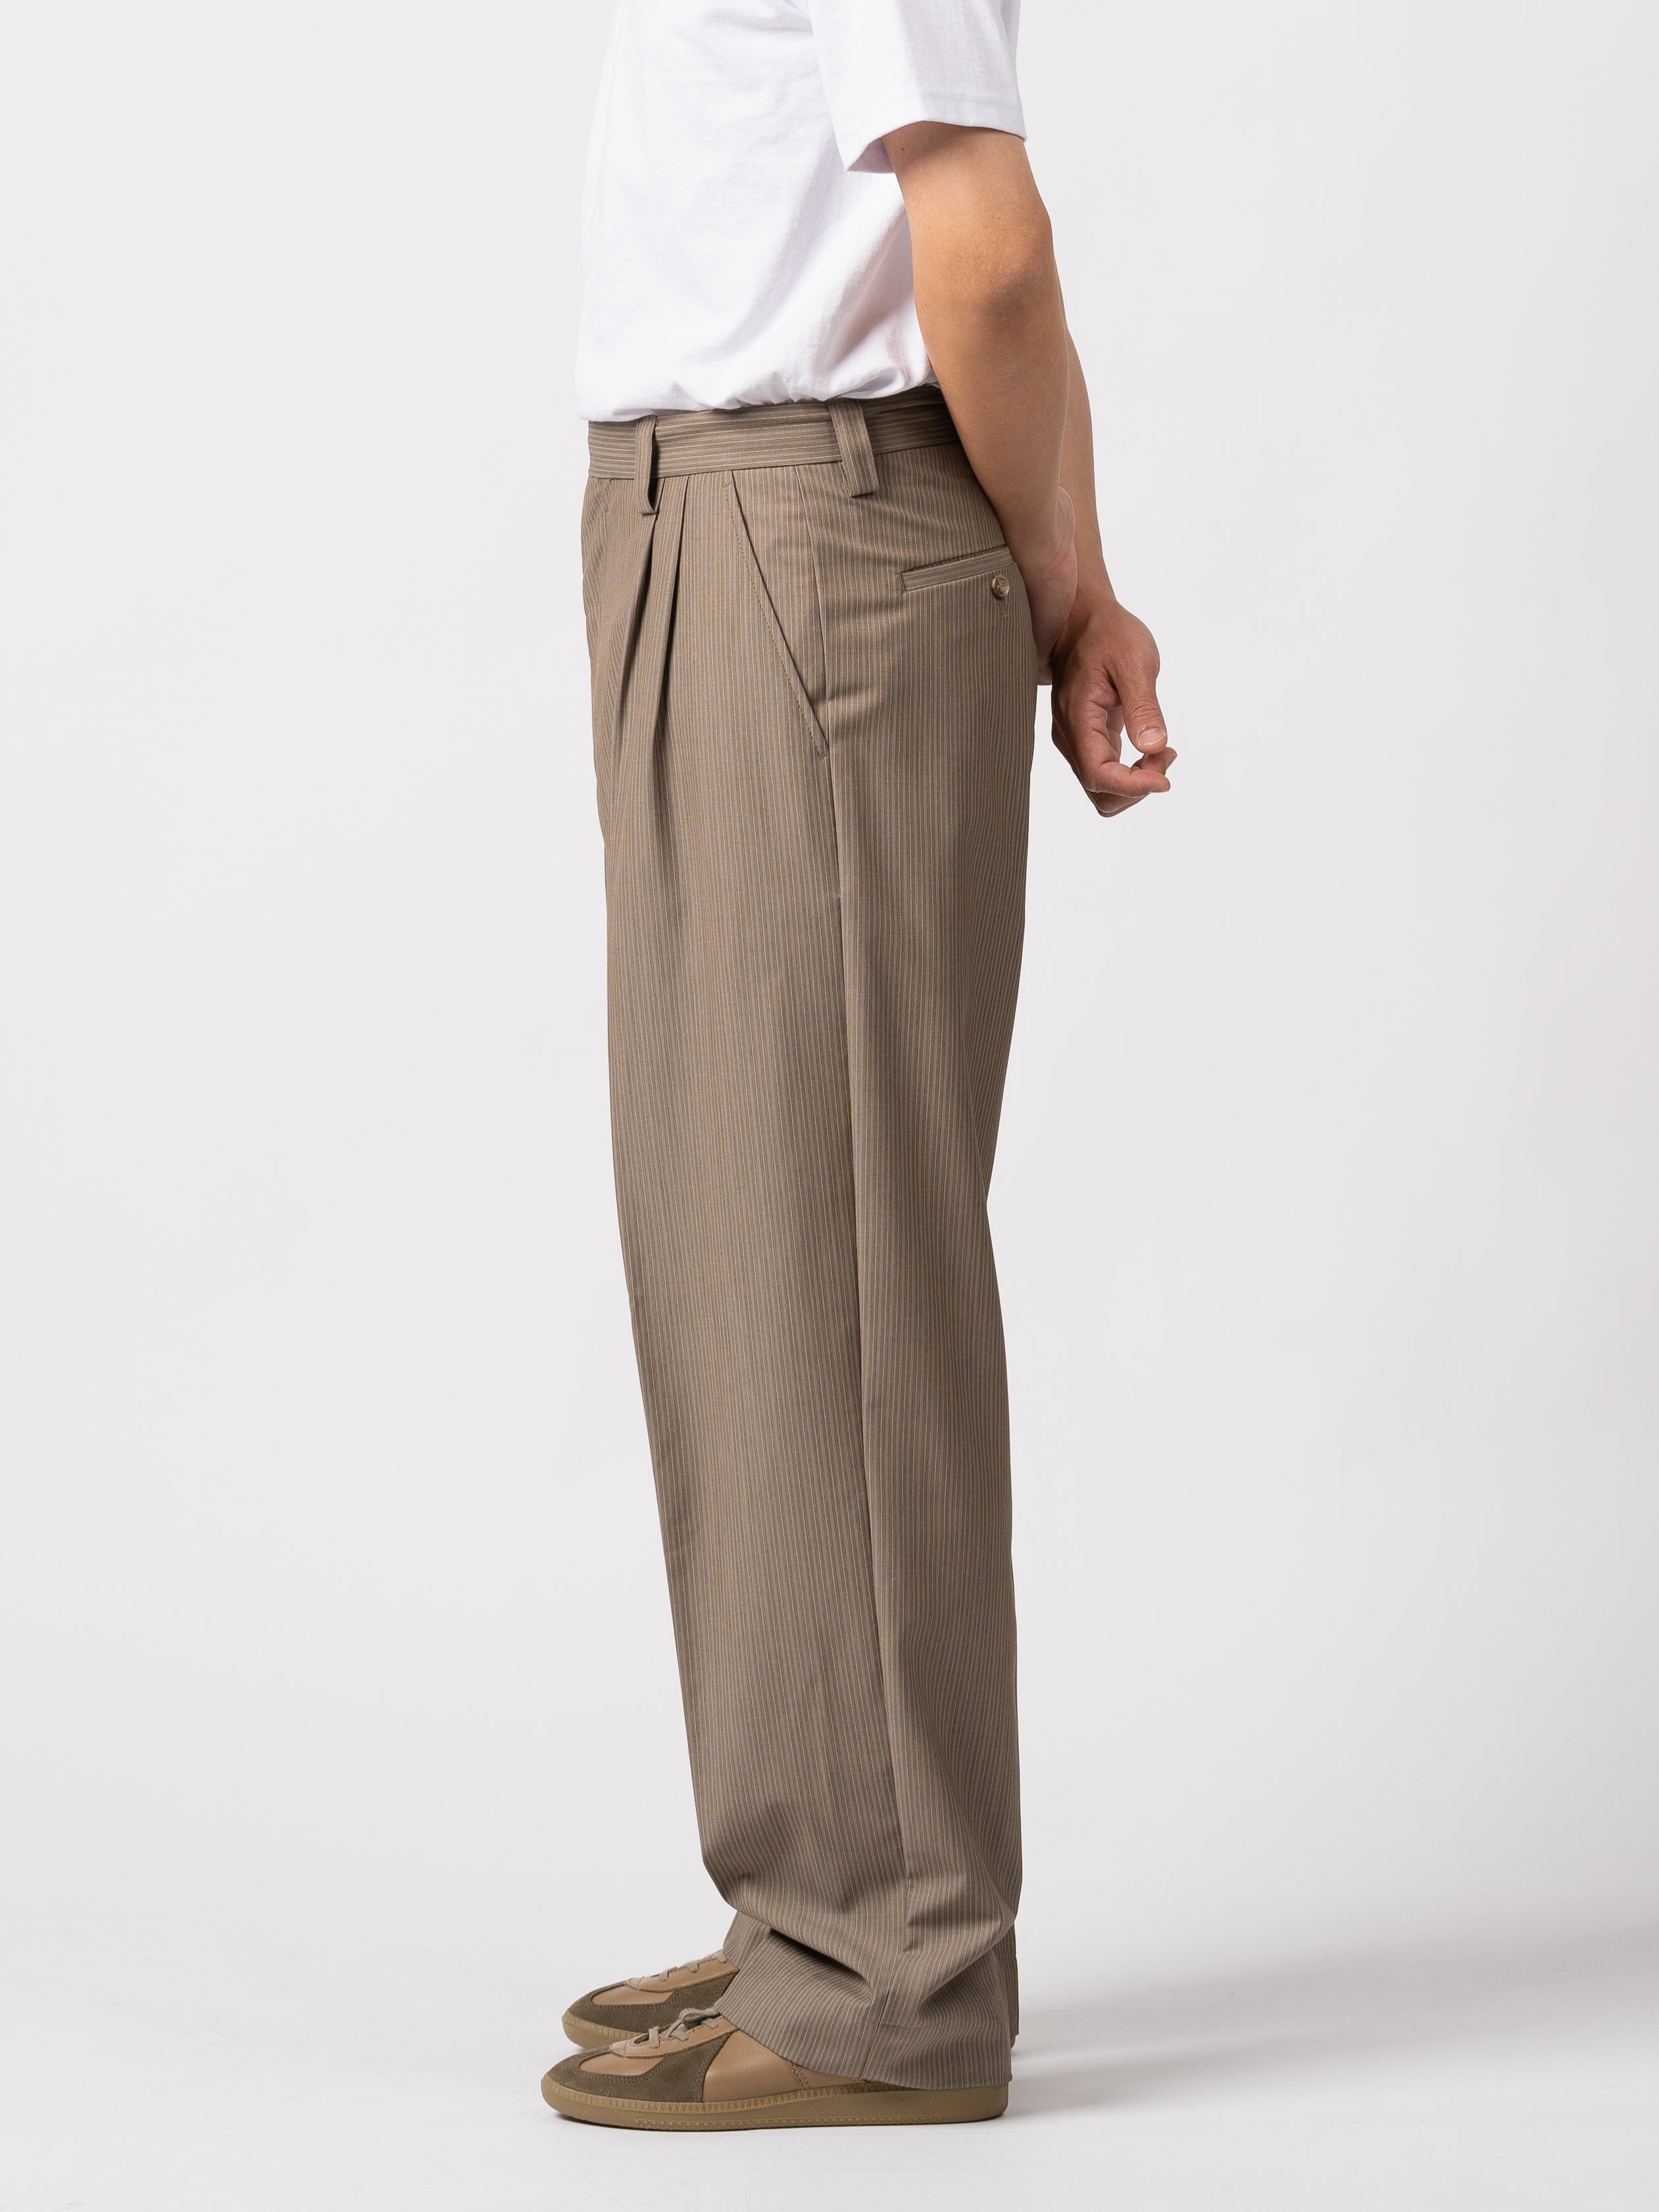 mfpen Classic Trousers (Taupe Grey Stripe)